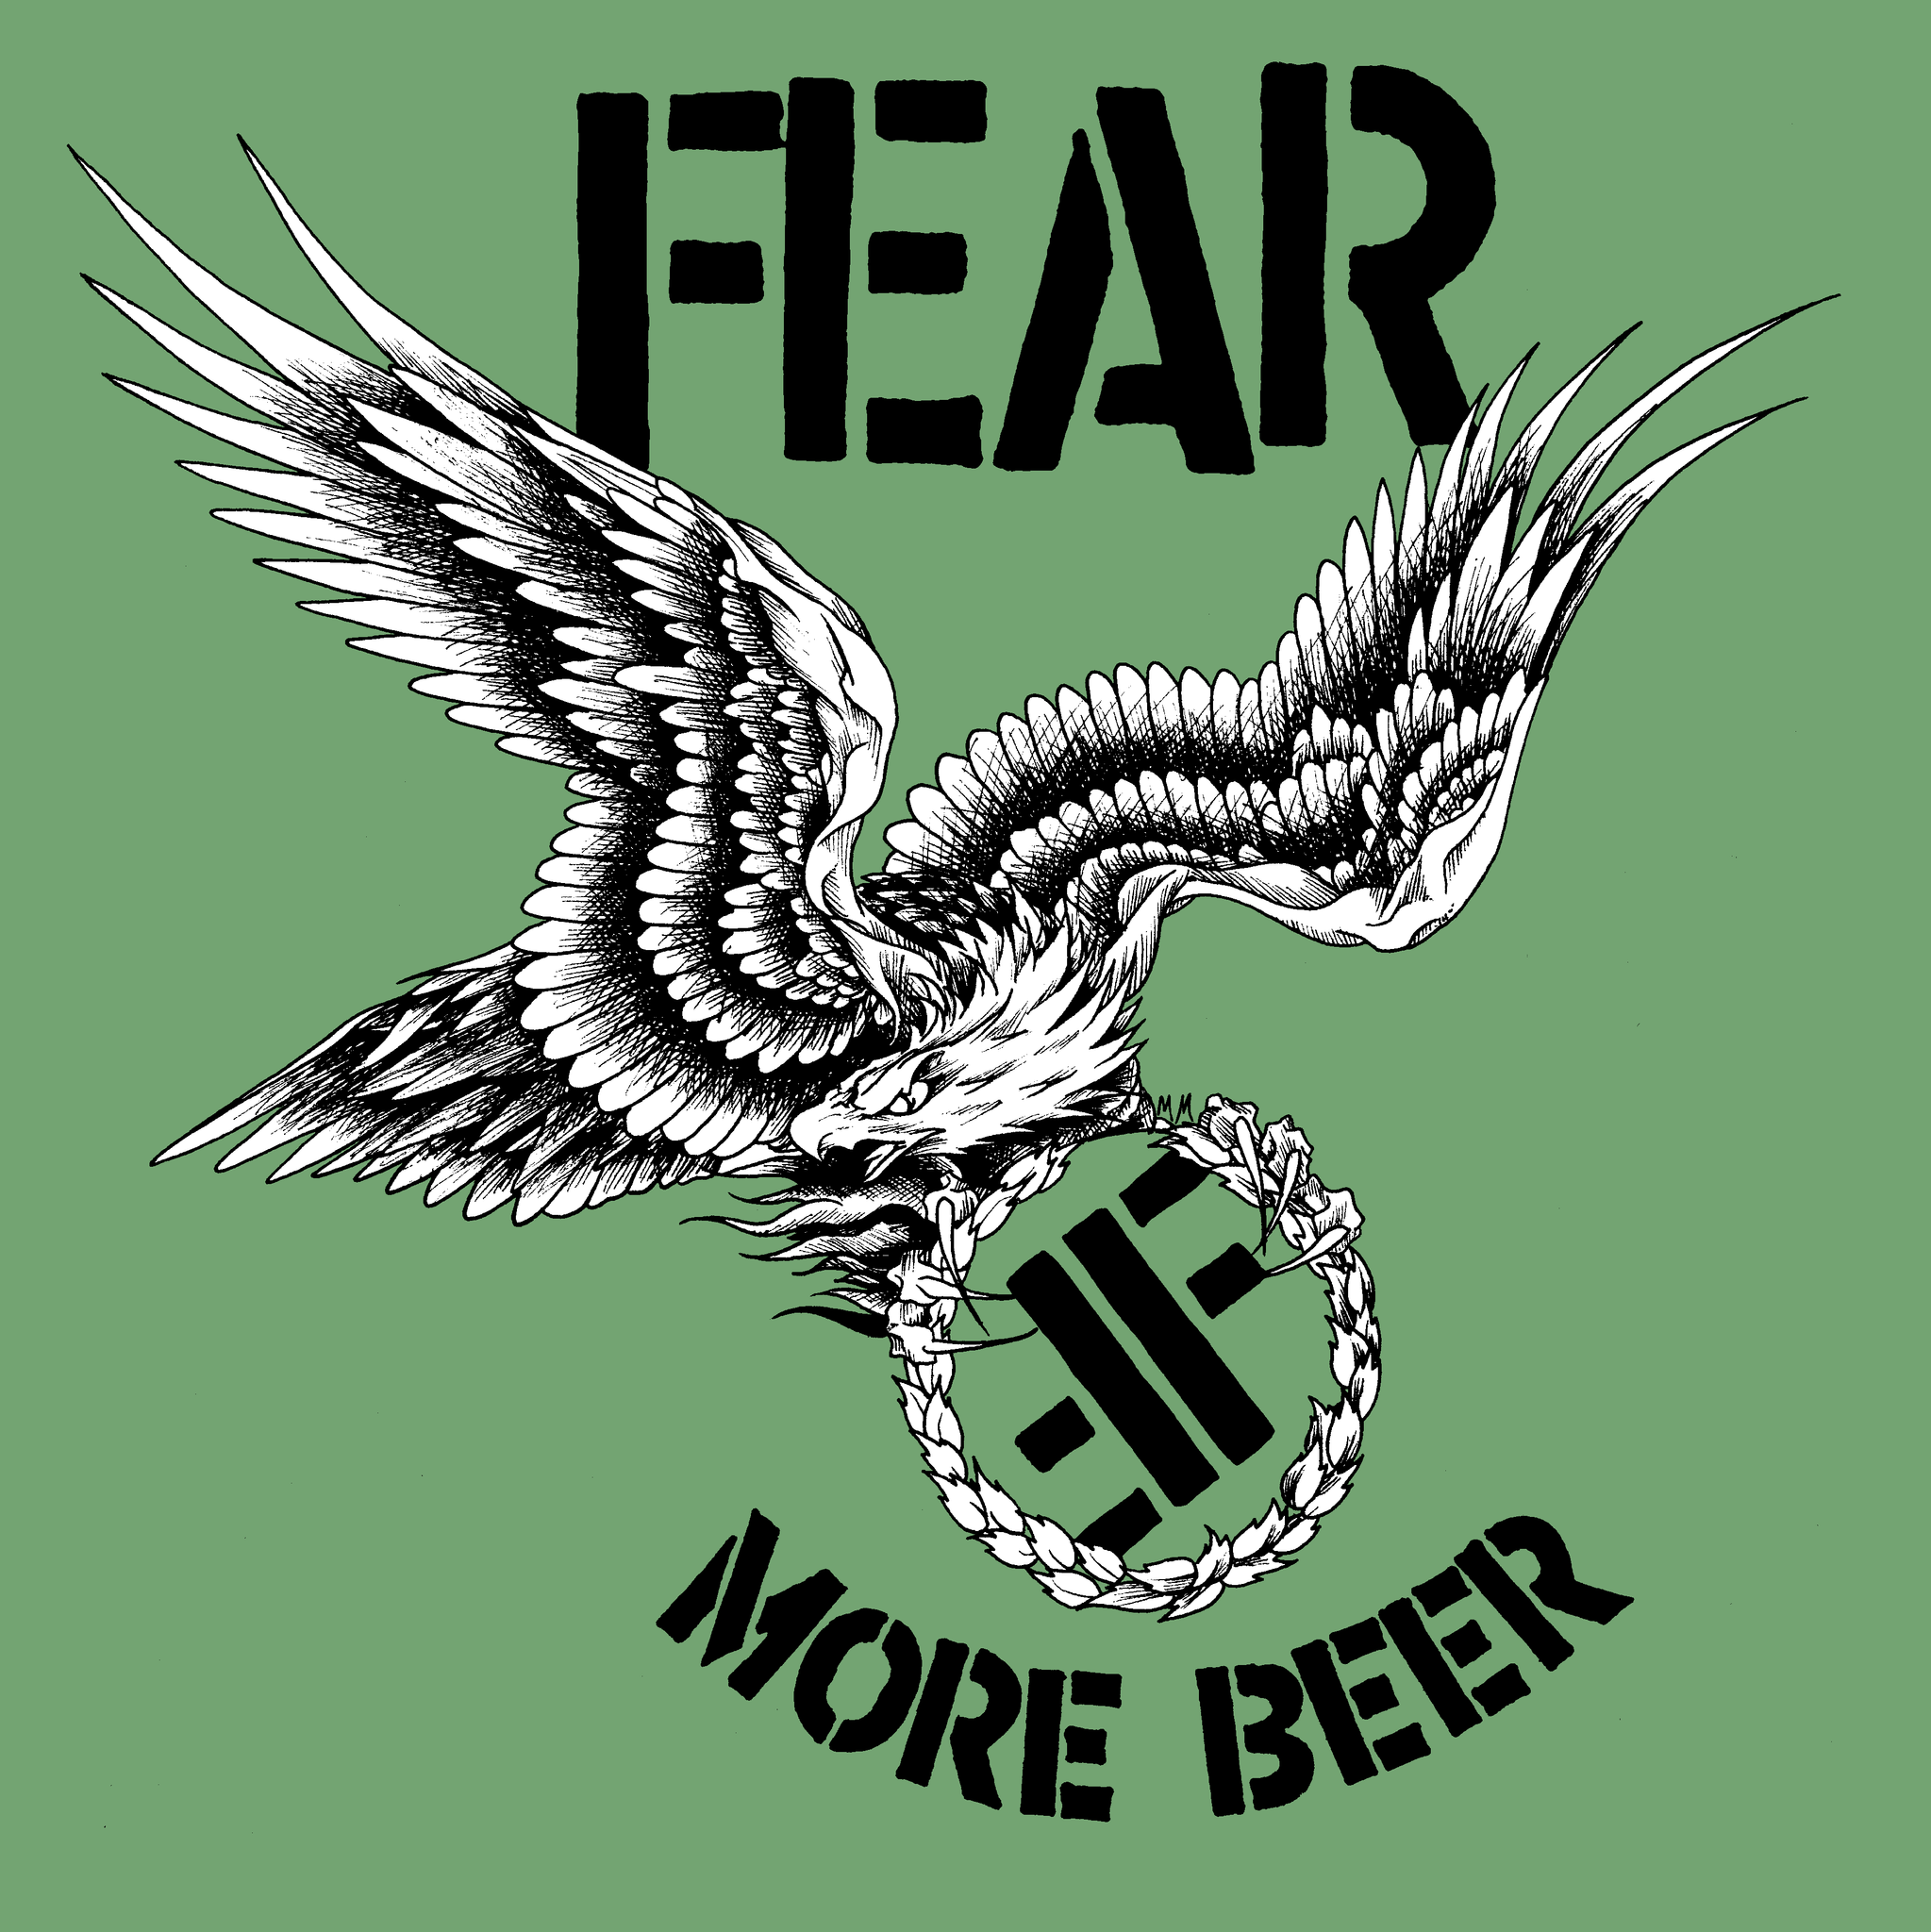 FEAR - "MORE BEER" 35TH ANNIVERSARY LIMITED EDITION 3XLP